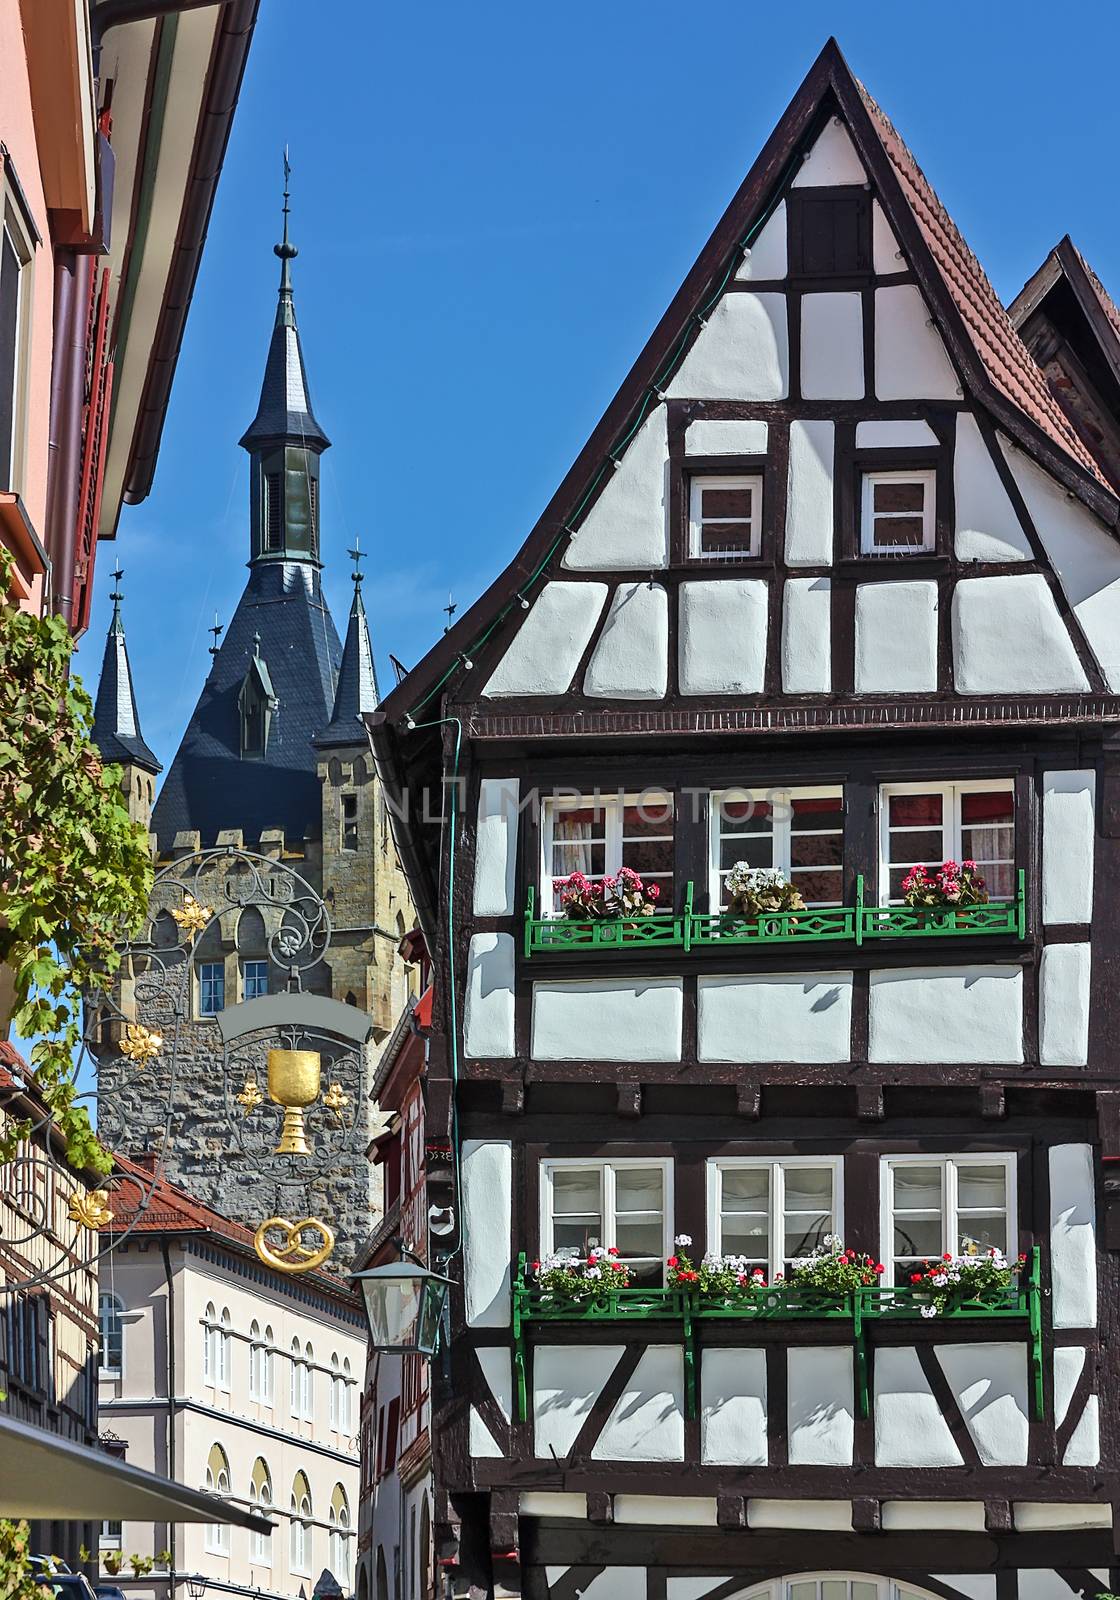 Bad Wimpfen is an historic spa town in the district of Heilbronn in the Baden-Wurttemberg region of southern Germany.